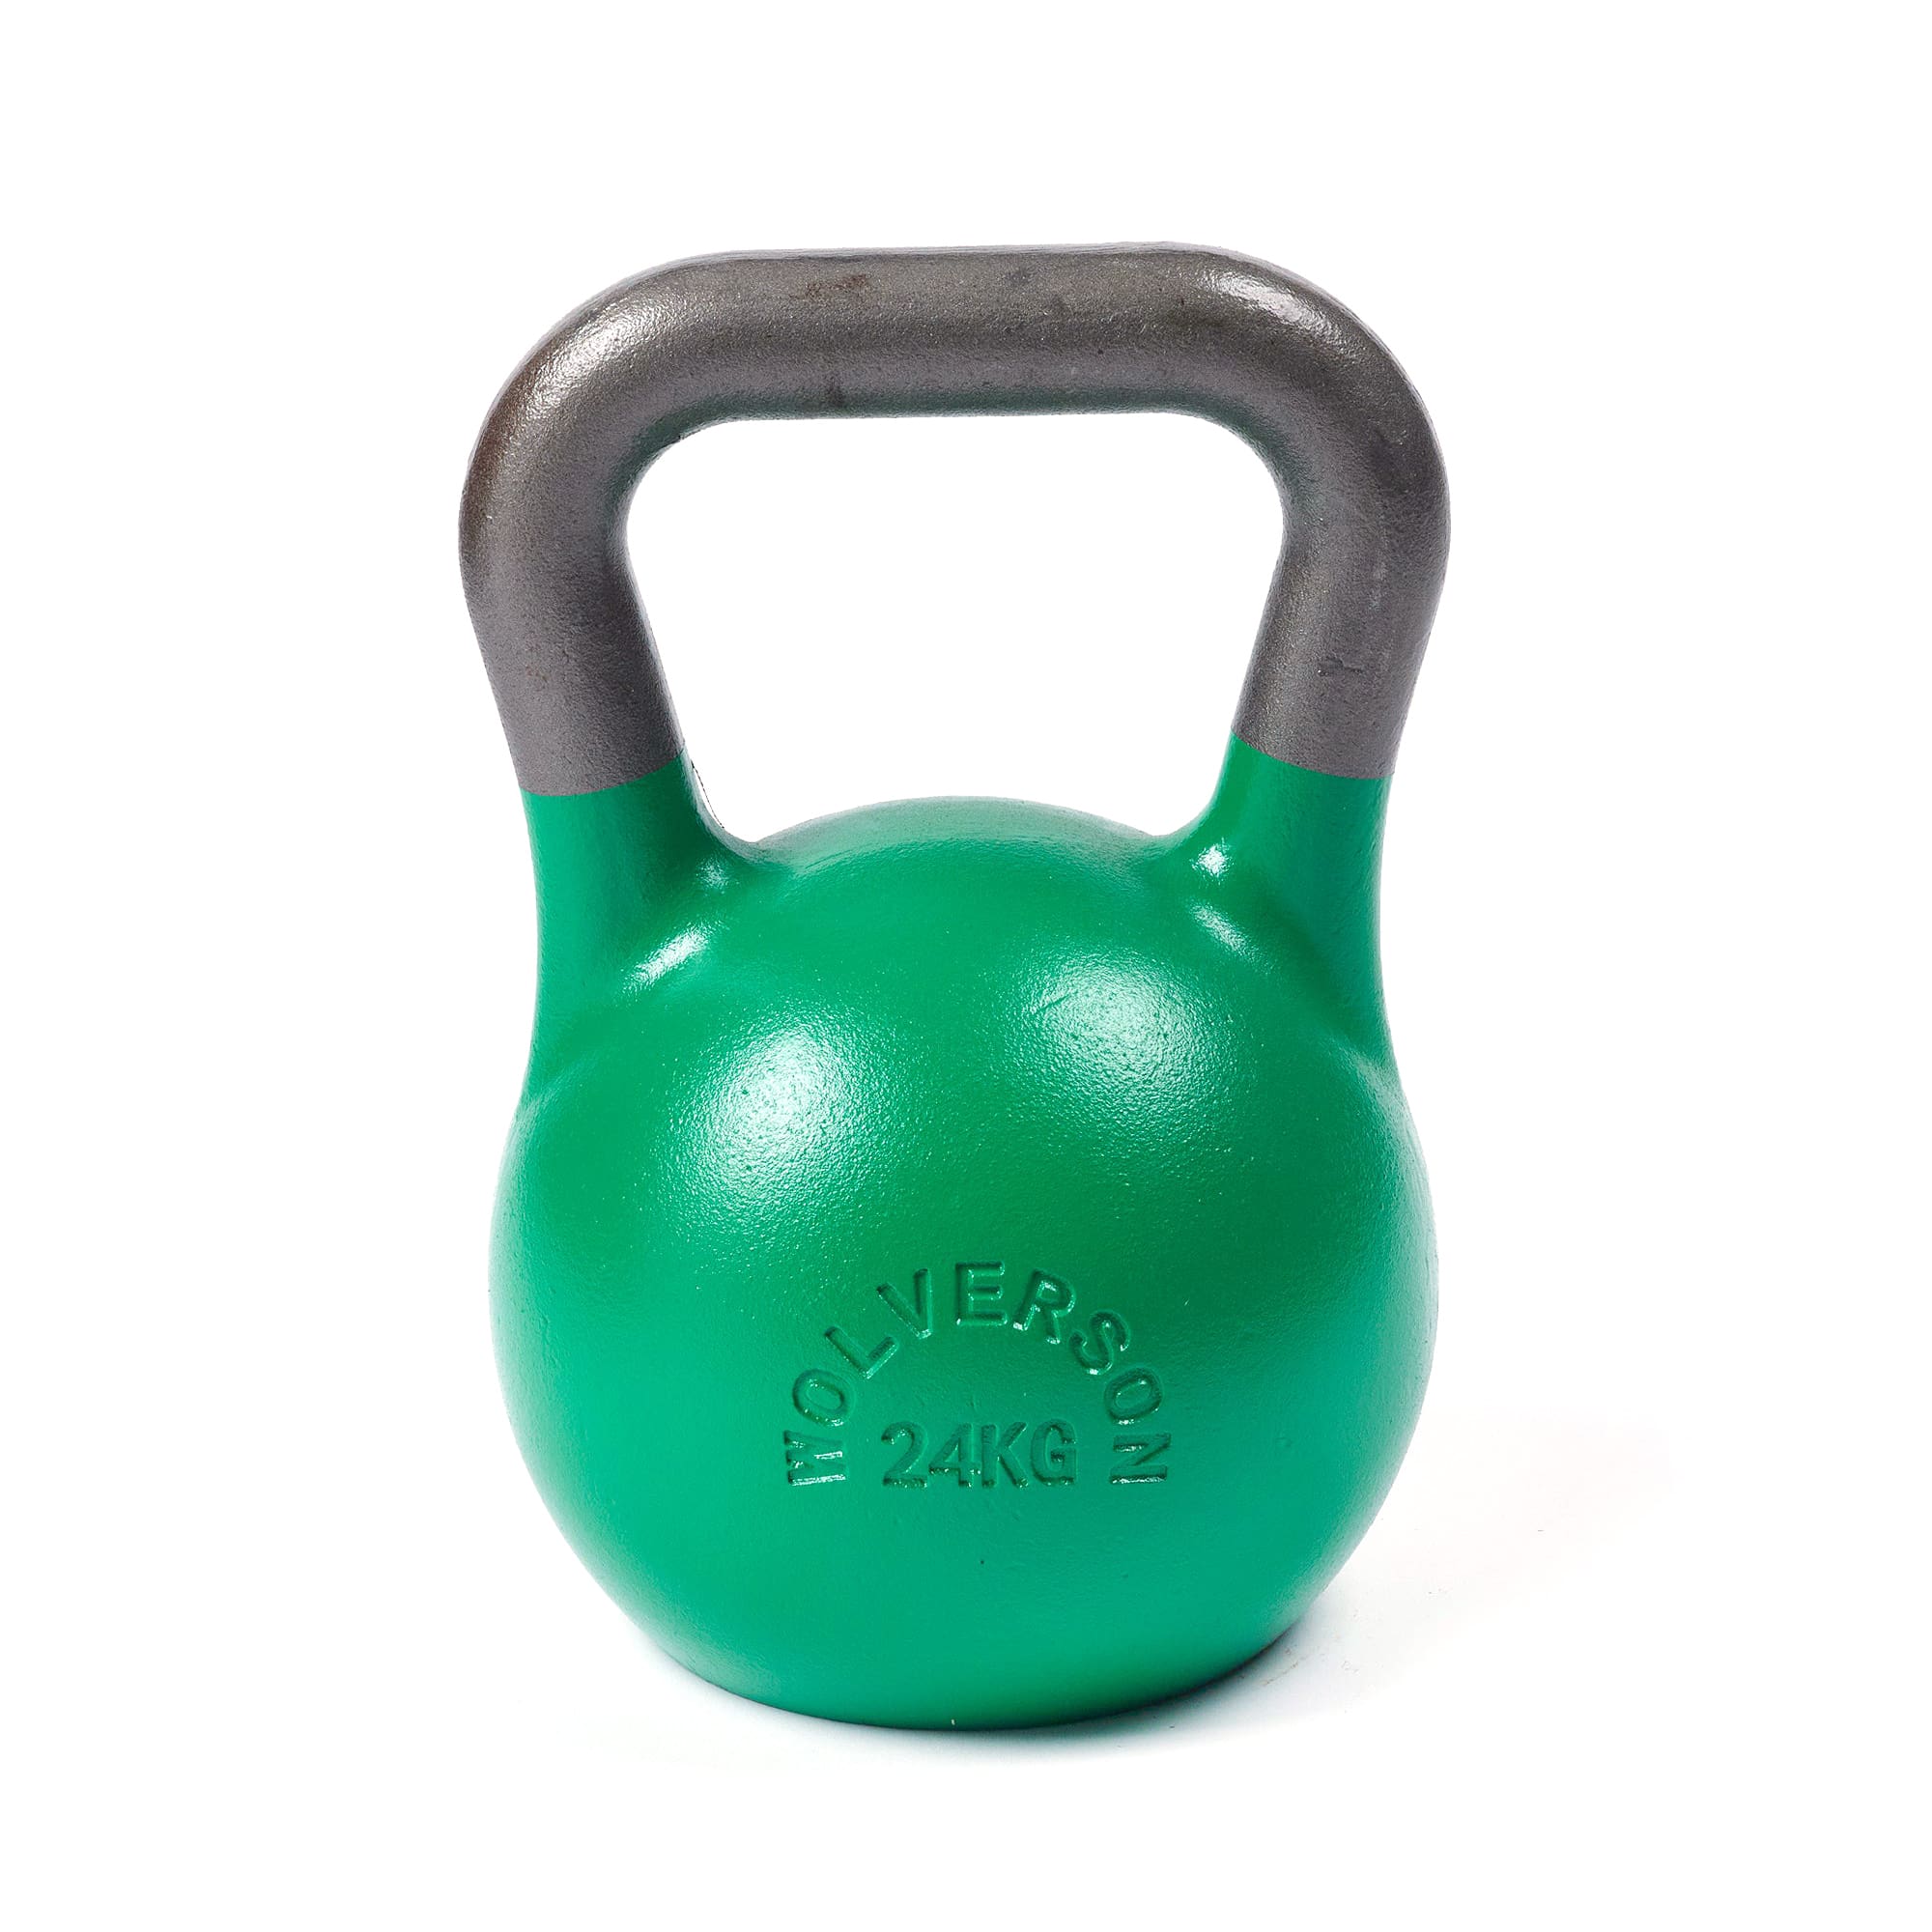 Gronk Fitness Cast Iron Kettlebells – Gronk Fitness Products